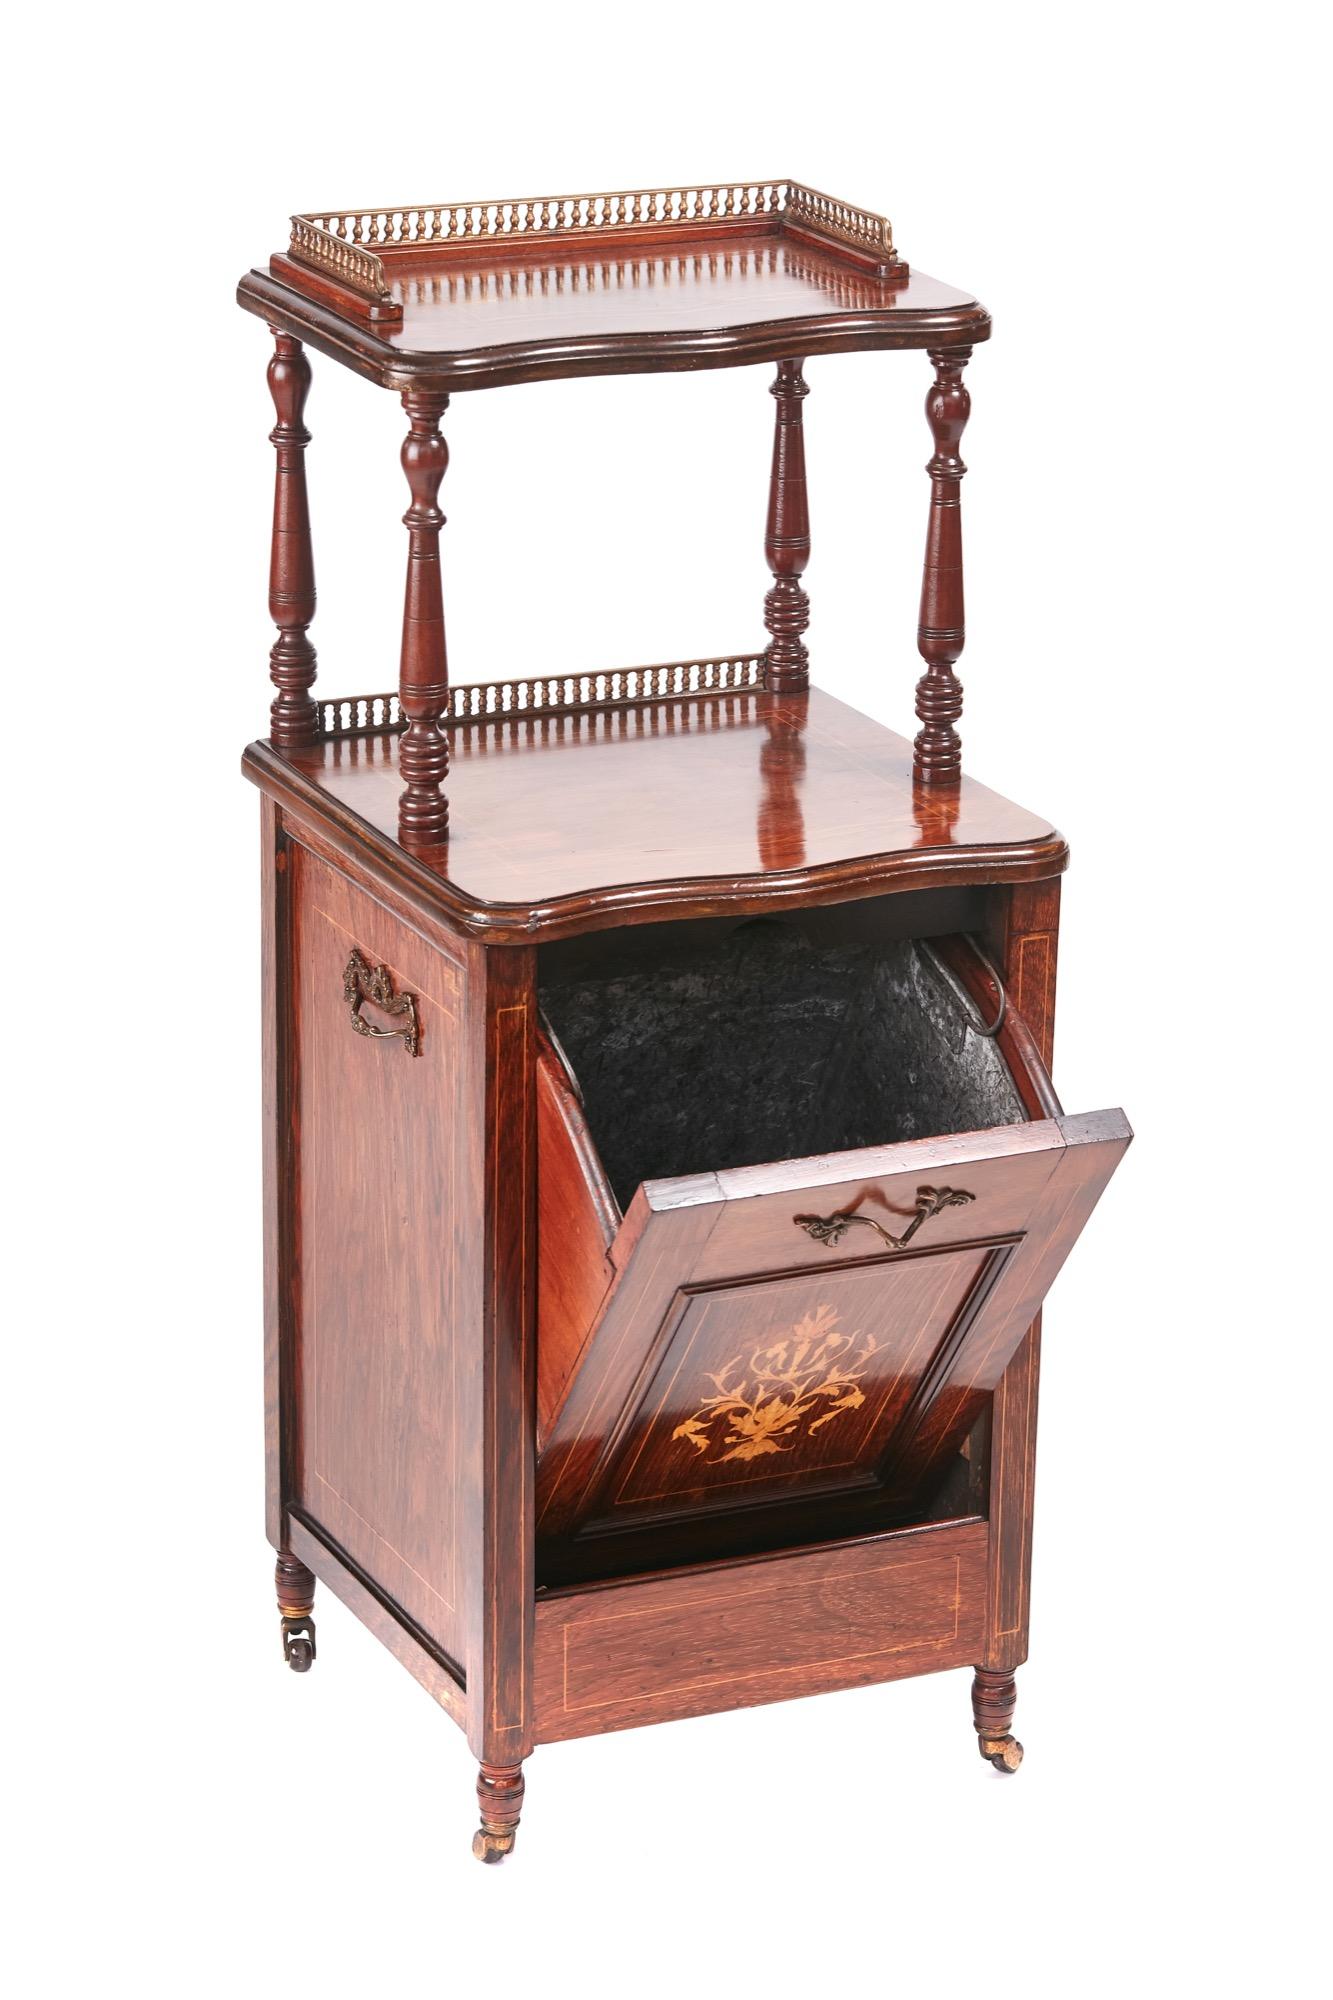 Quality antique Edwardian rosewood inlaid coal purdonium, having a quality brass gallery, shaped shelf, turned supports, fall front with lovely satinwood inlay, original brass handles, standing on turned feet with original brass castors
Lovely